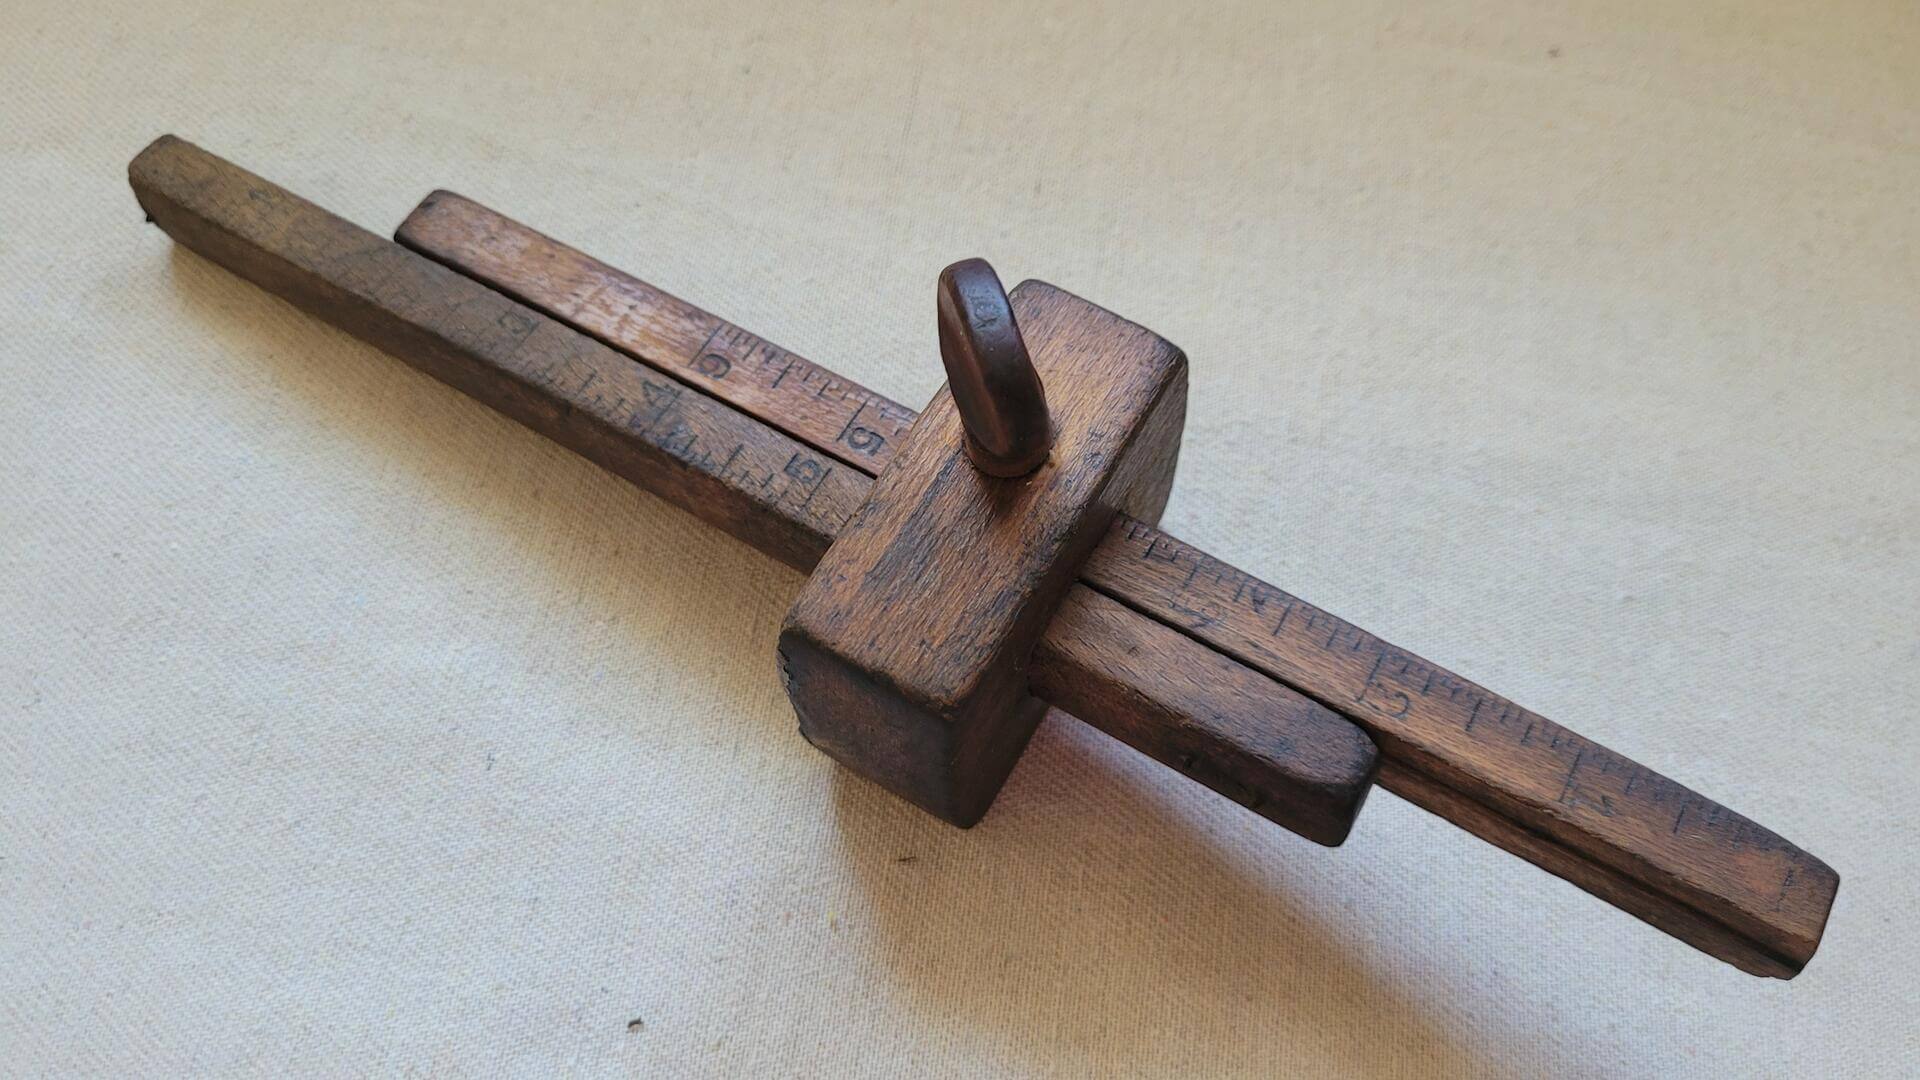 Antique Wooden Multi-Arm Mortise Marking Gauge w Thumb Screw Set - Vintage woodworking and cabinet making marking and measuring collectible tools